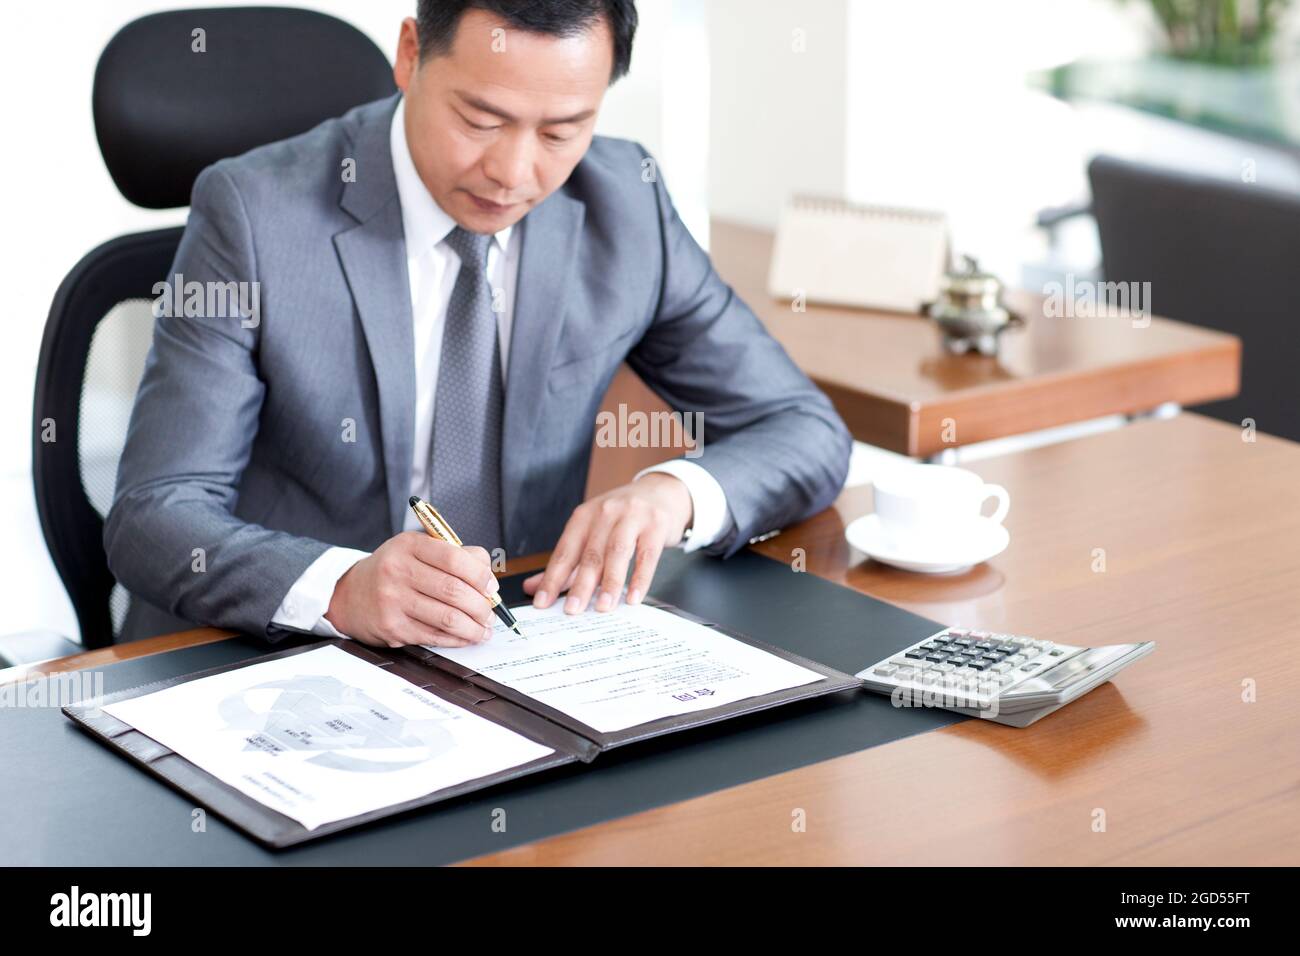 Mature businessman sitting at desk signing a document Stock Photo